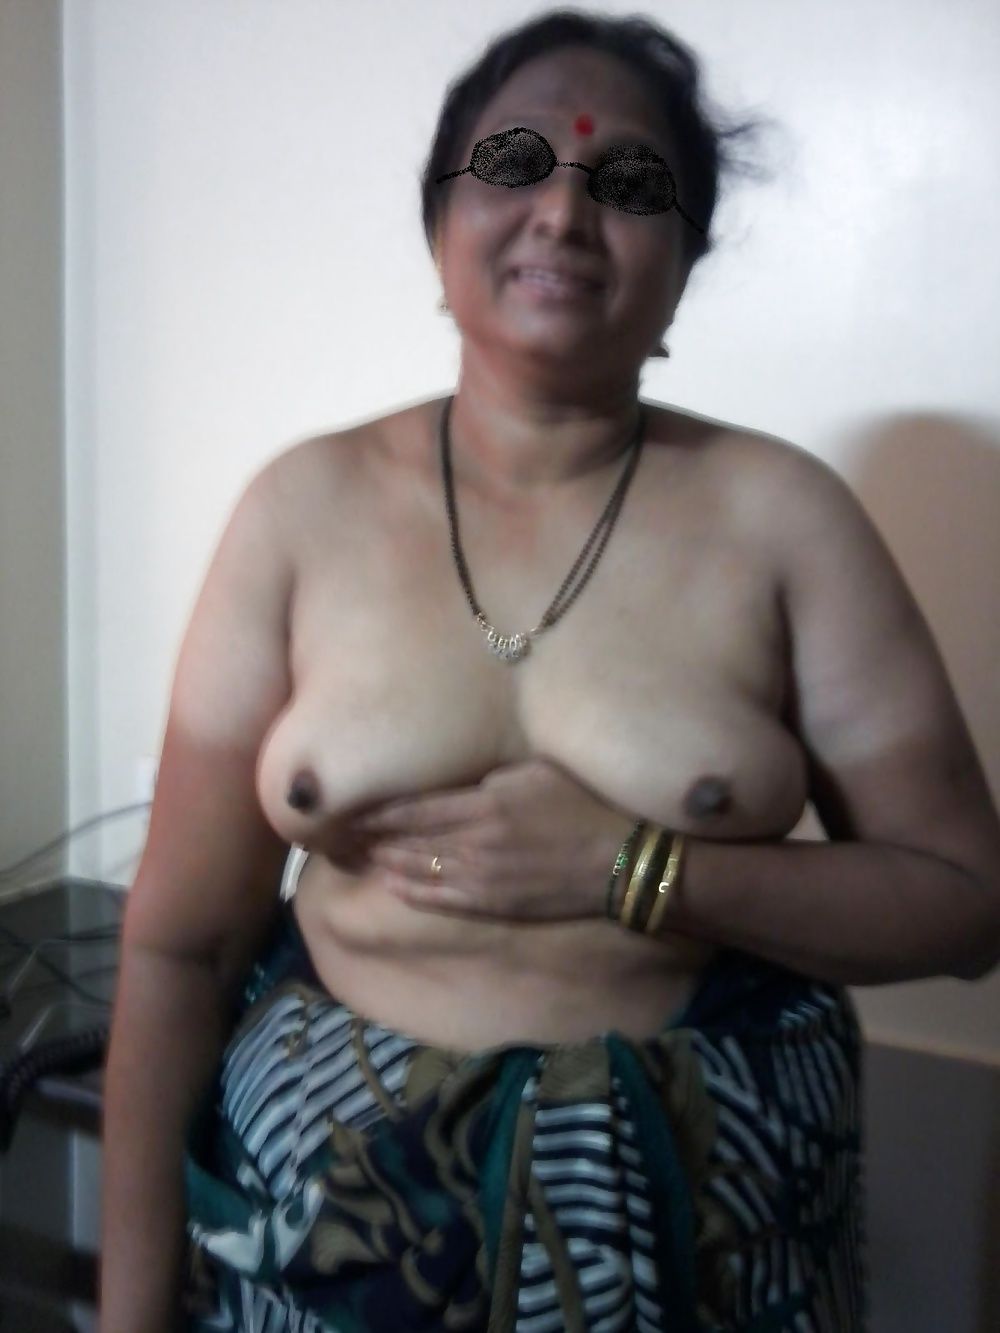 Porn pictures of old aunties - Hot Naked Pics. Comments: 3